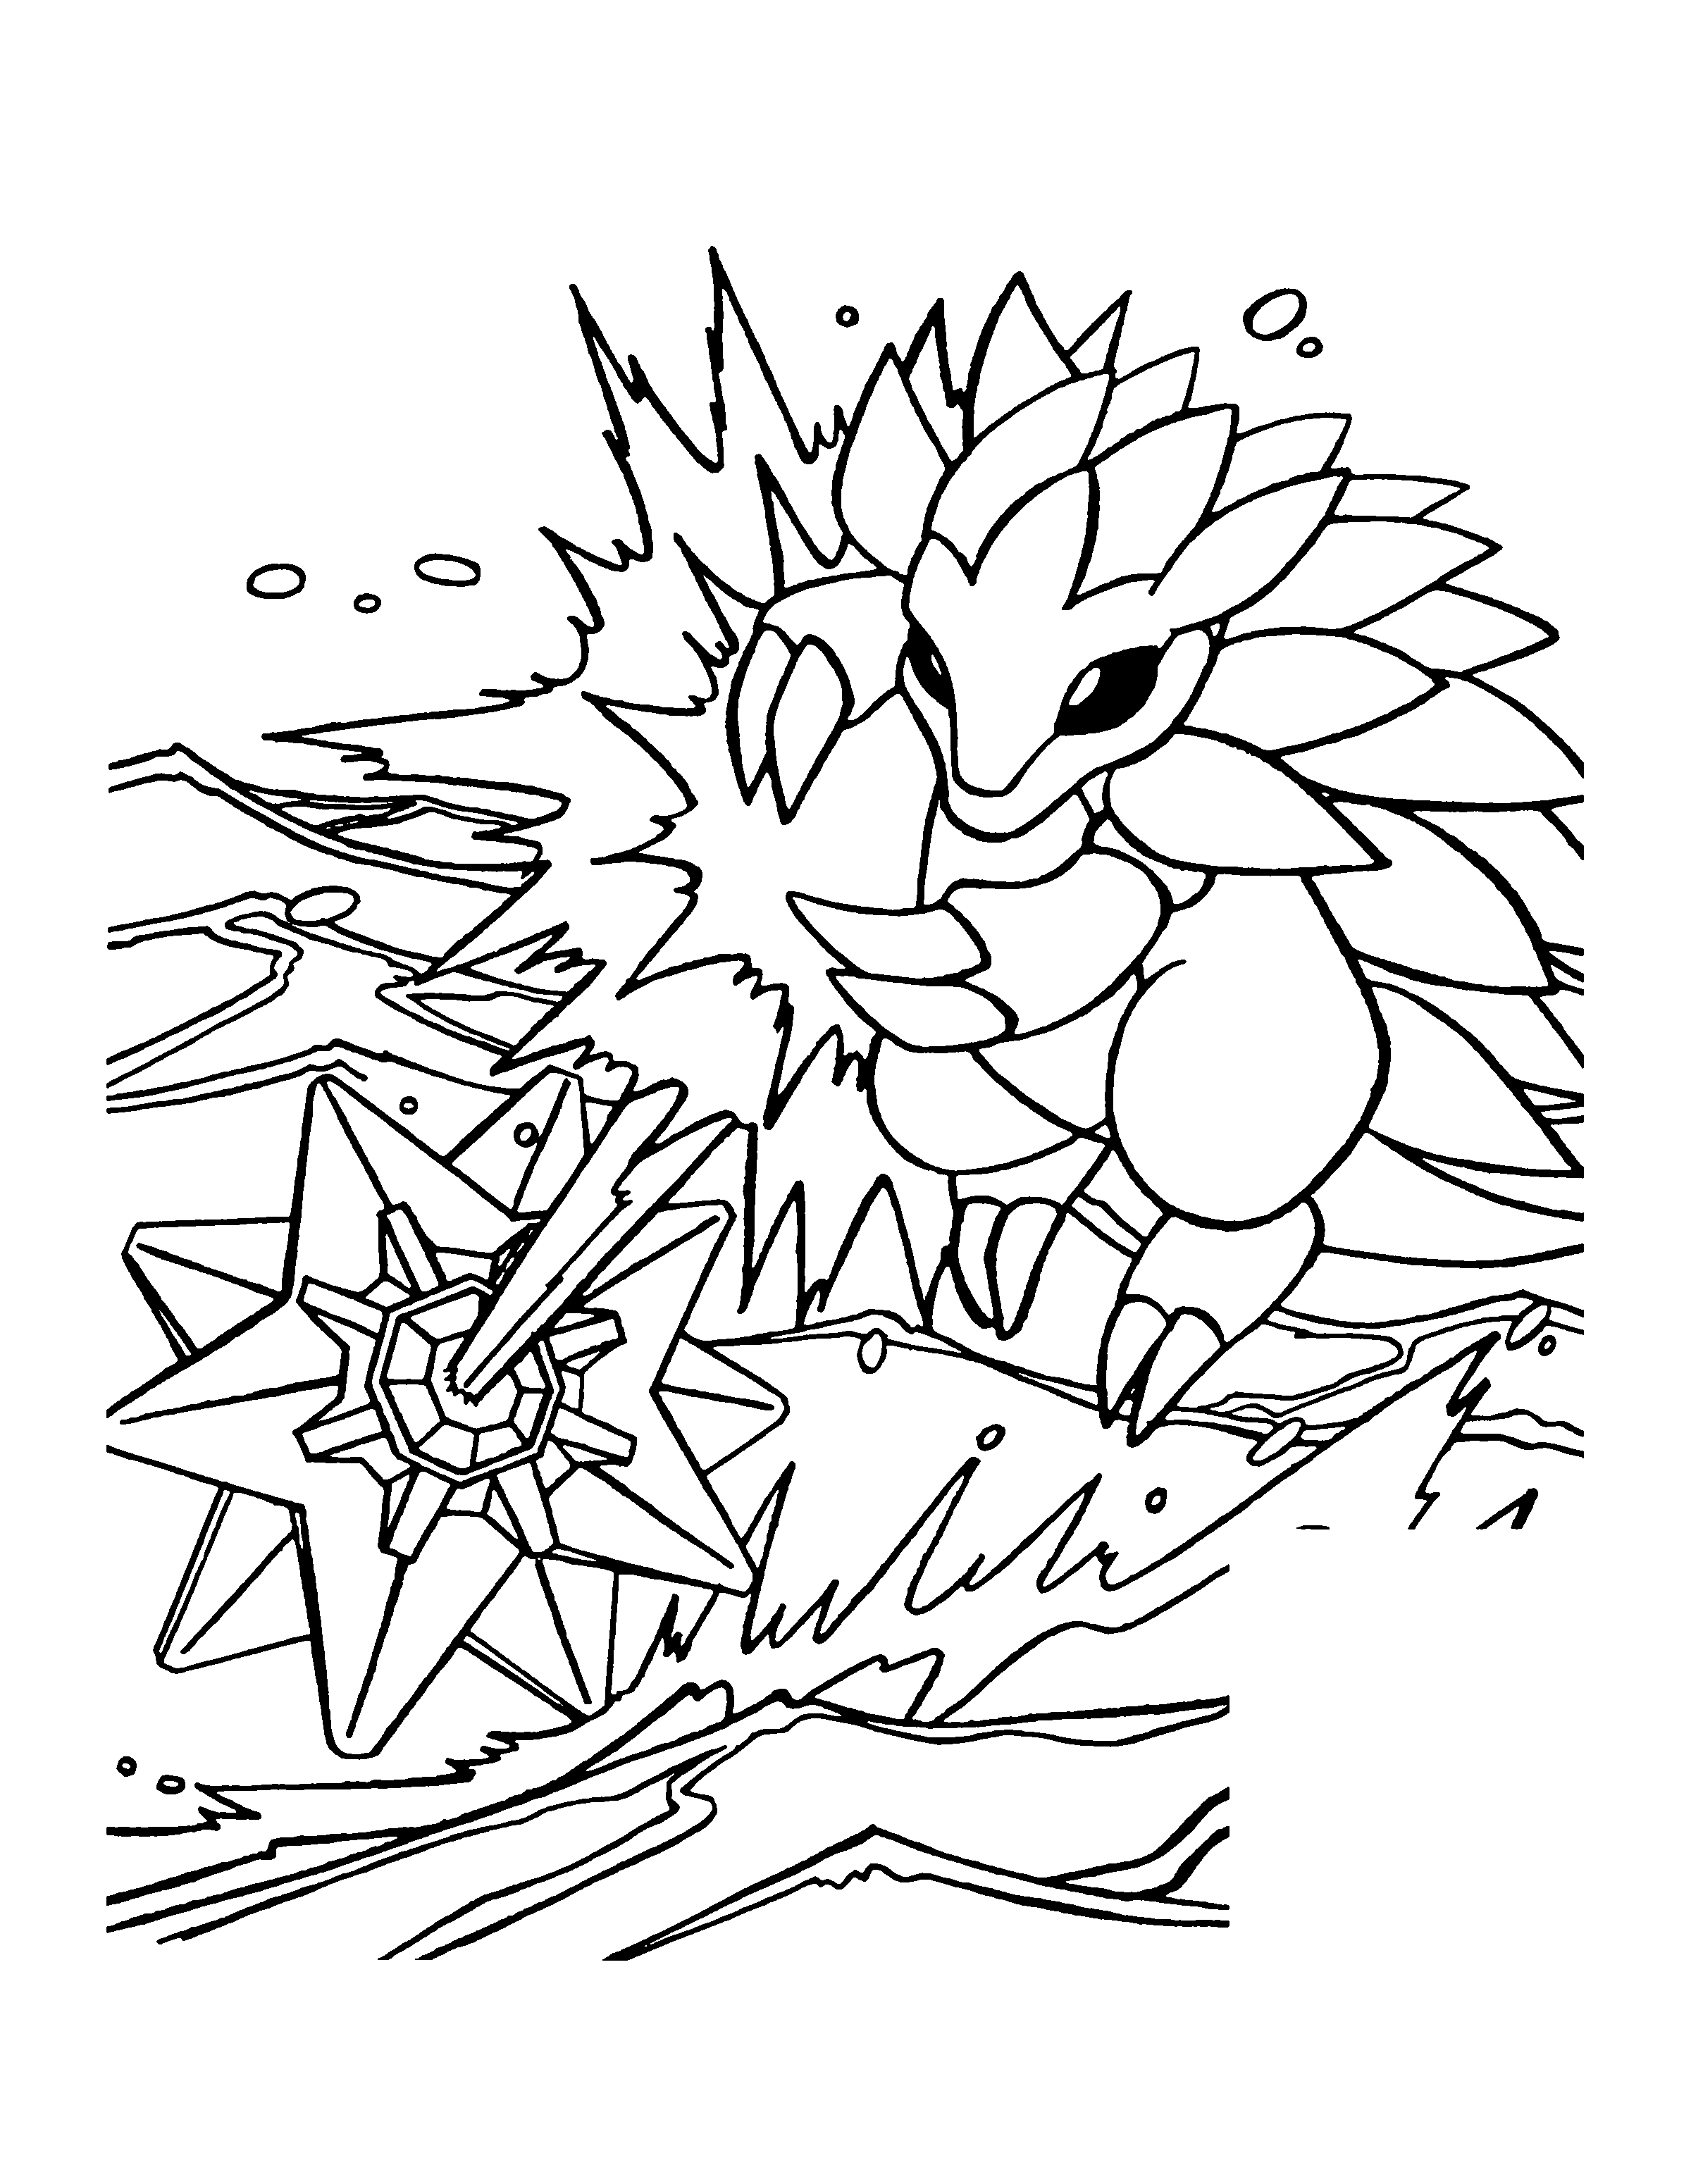 animated-coloring-pages-pokemon-image-0677